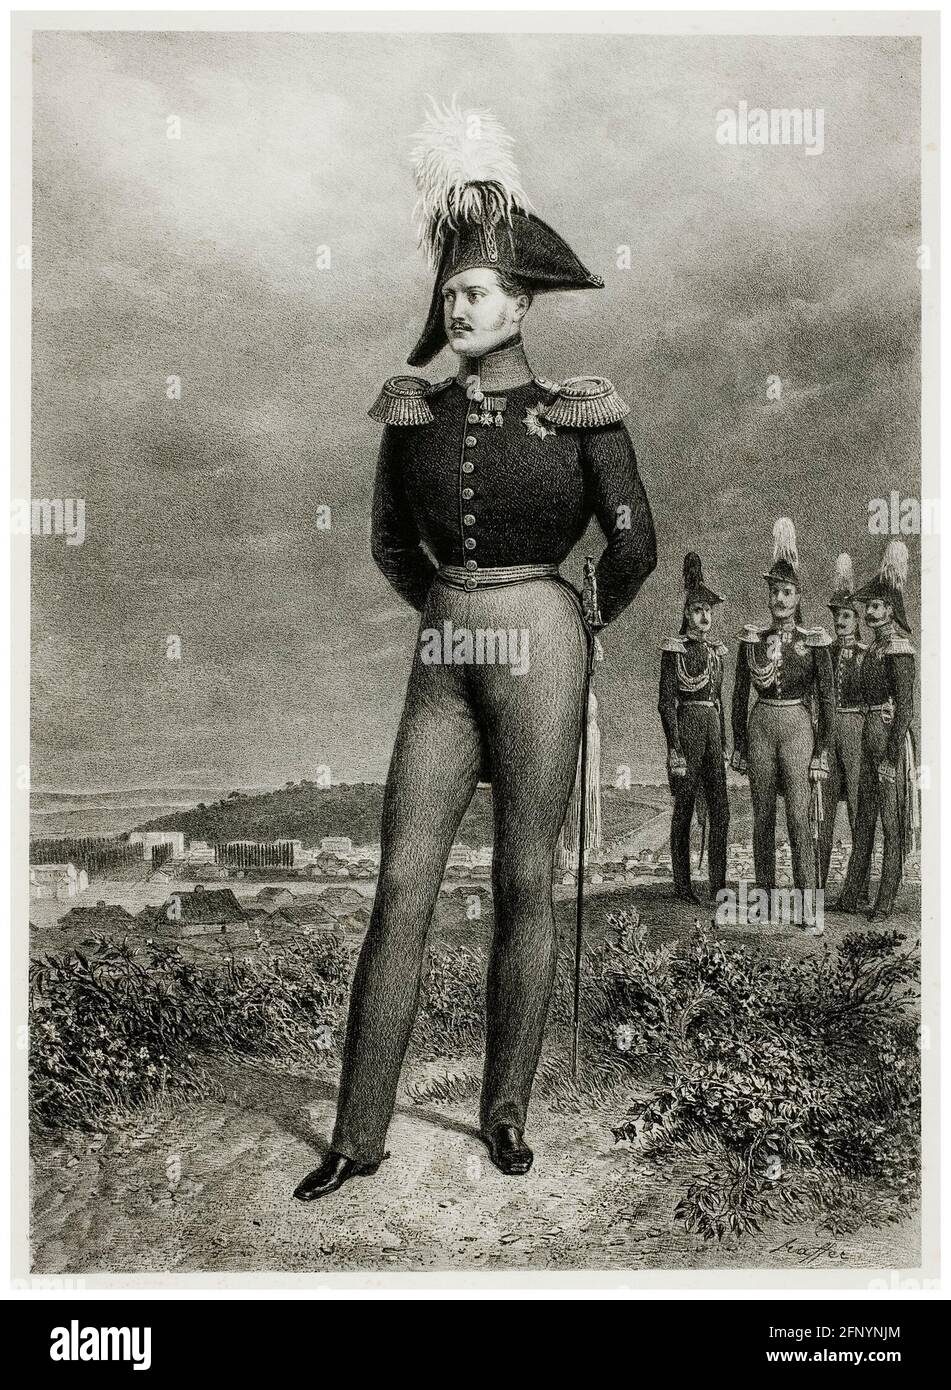 Nicholas I (1796-1855), Emperor of Russia 1825-1855, at Camp Vosnessensk, October 6th 1837, portrait engraving by Denis Auguste Marie Raffet, 1842-1845 Stock Photo